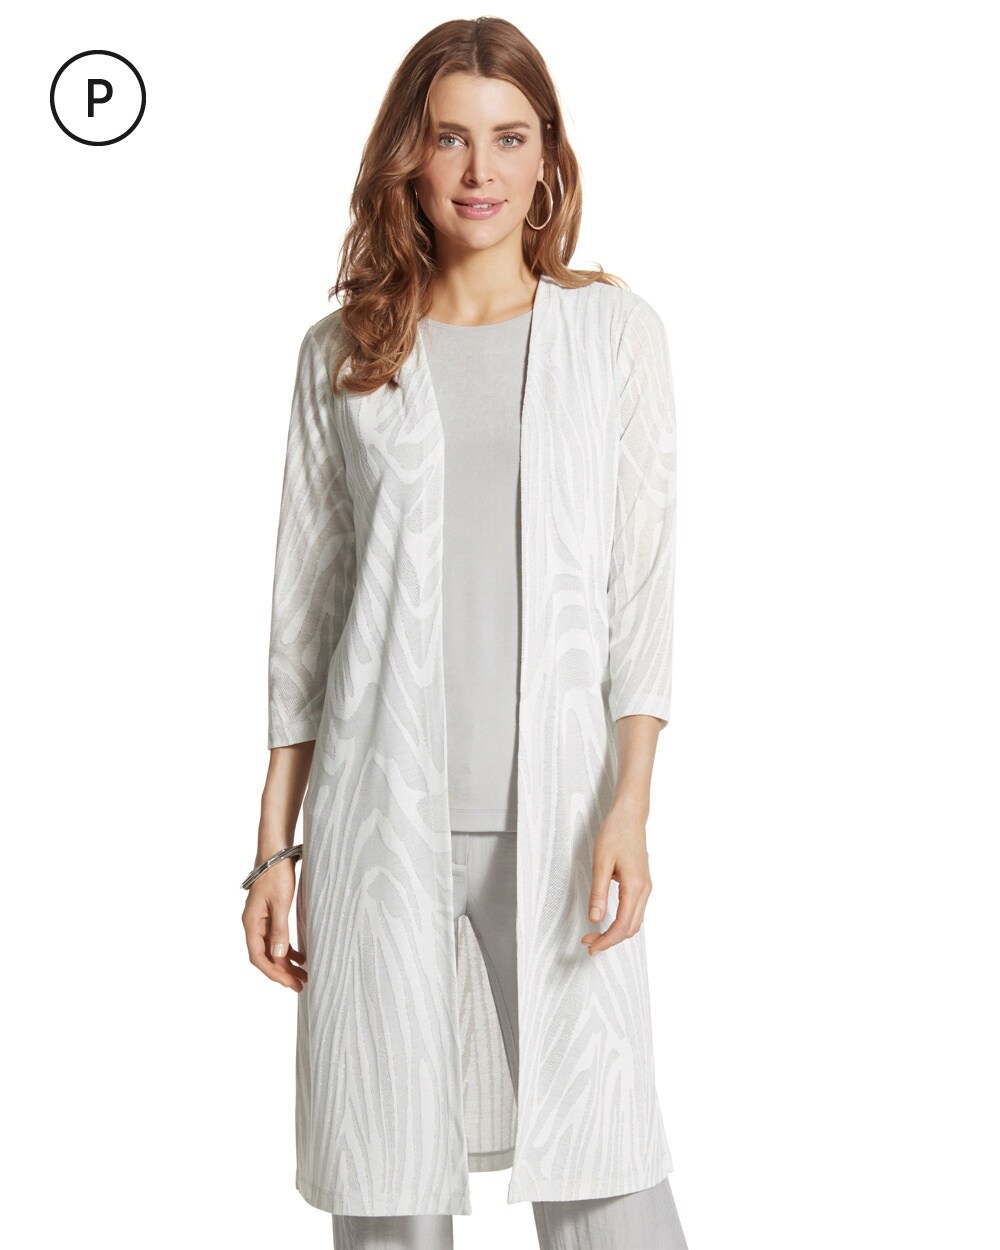 Travelers Collection Petite Zebra-Striped Duster Jacket